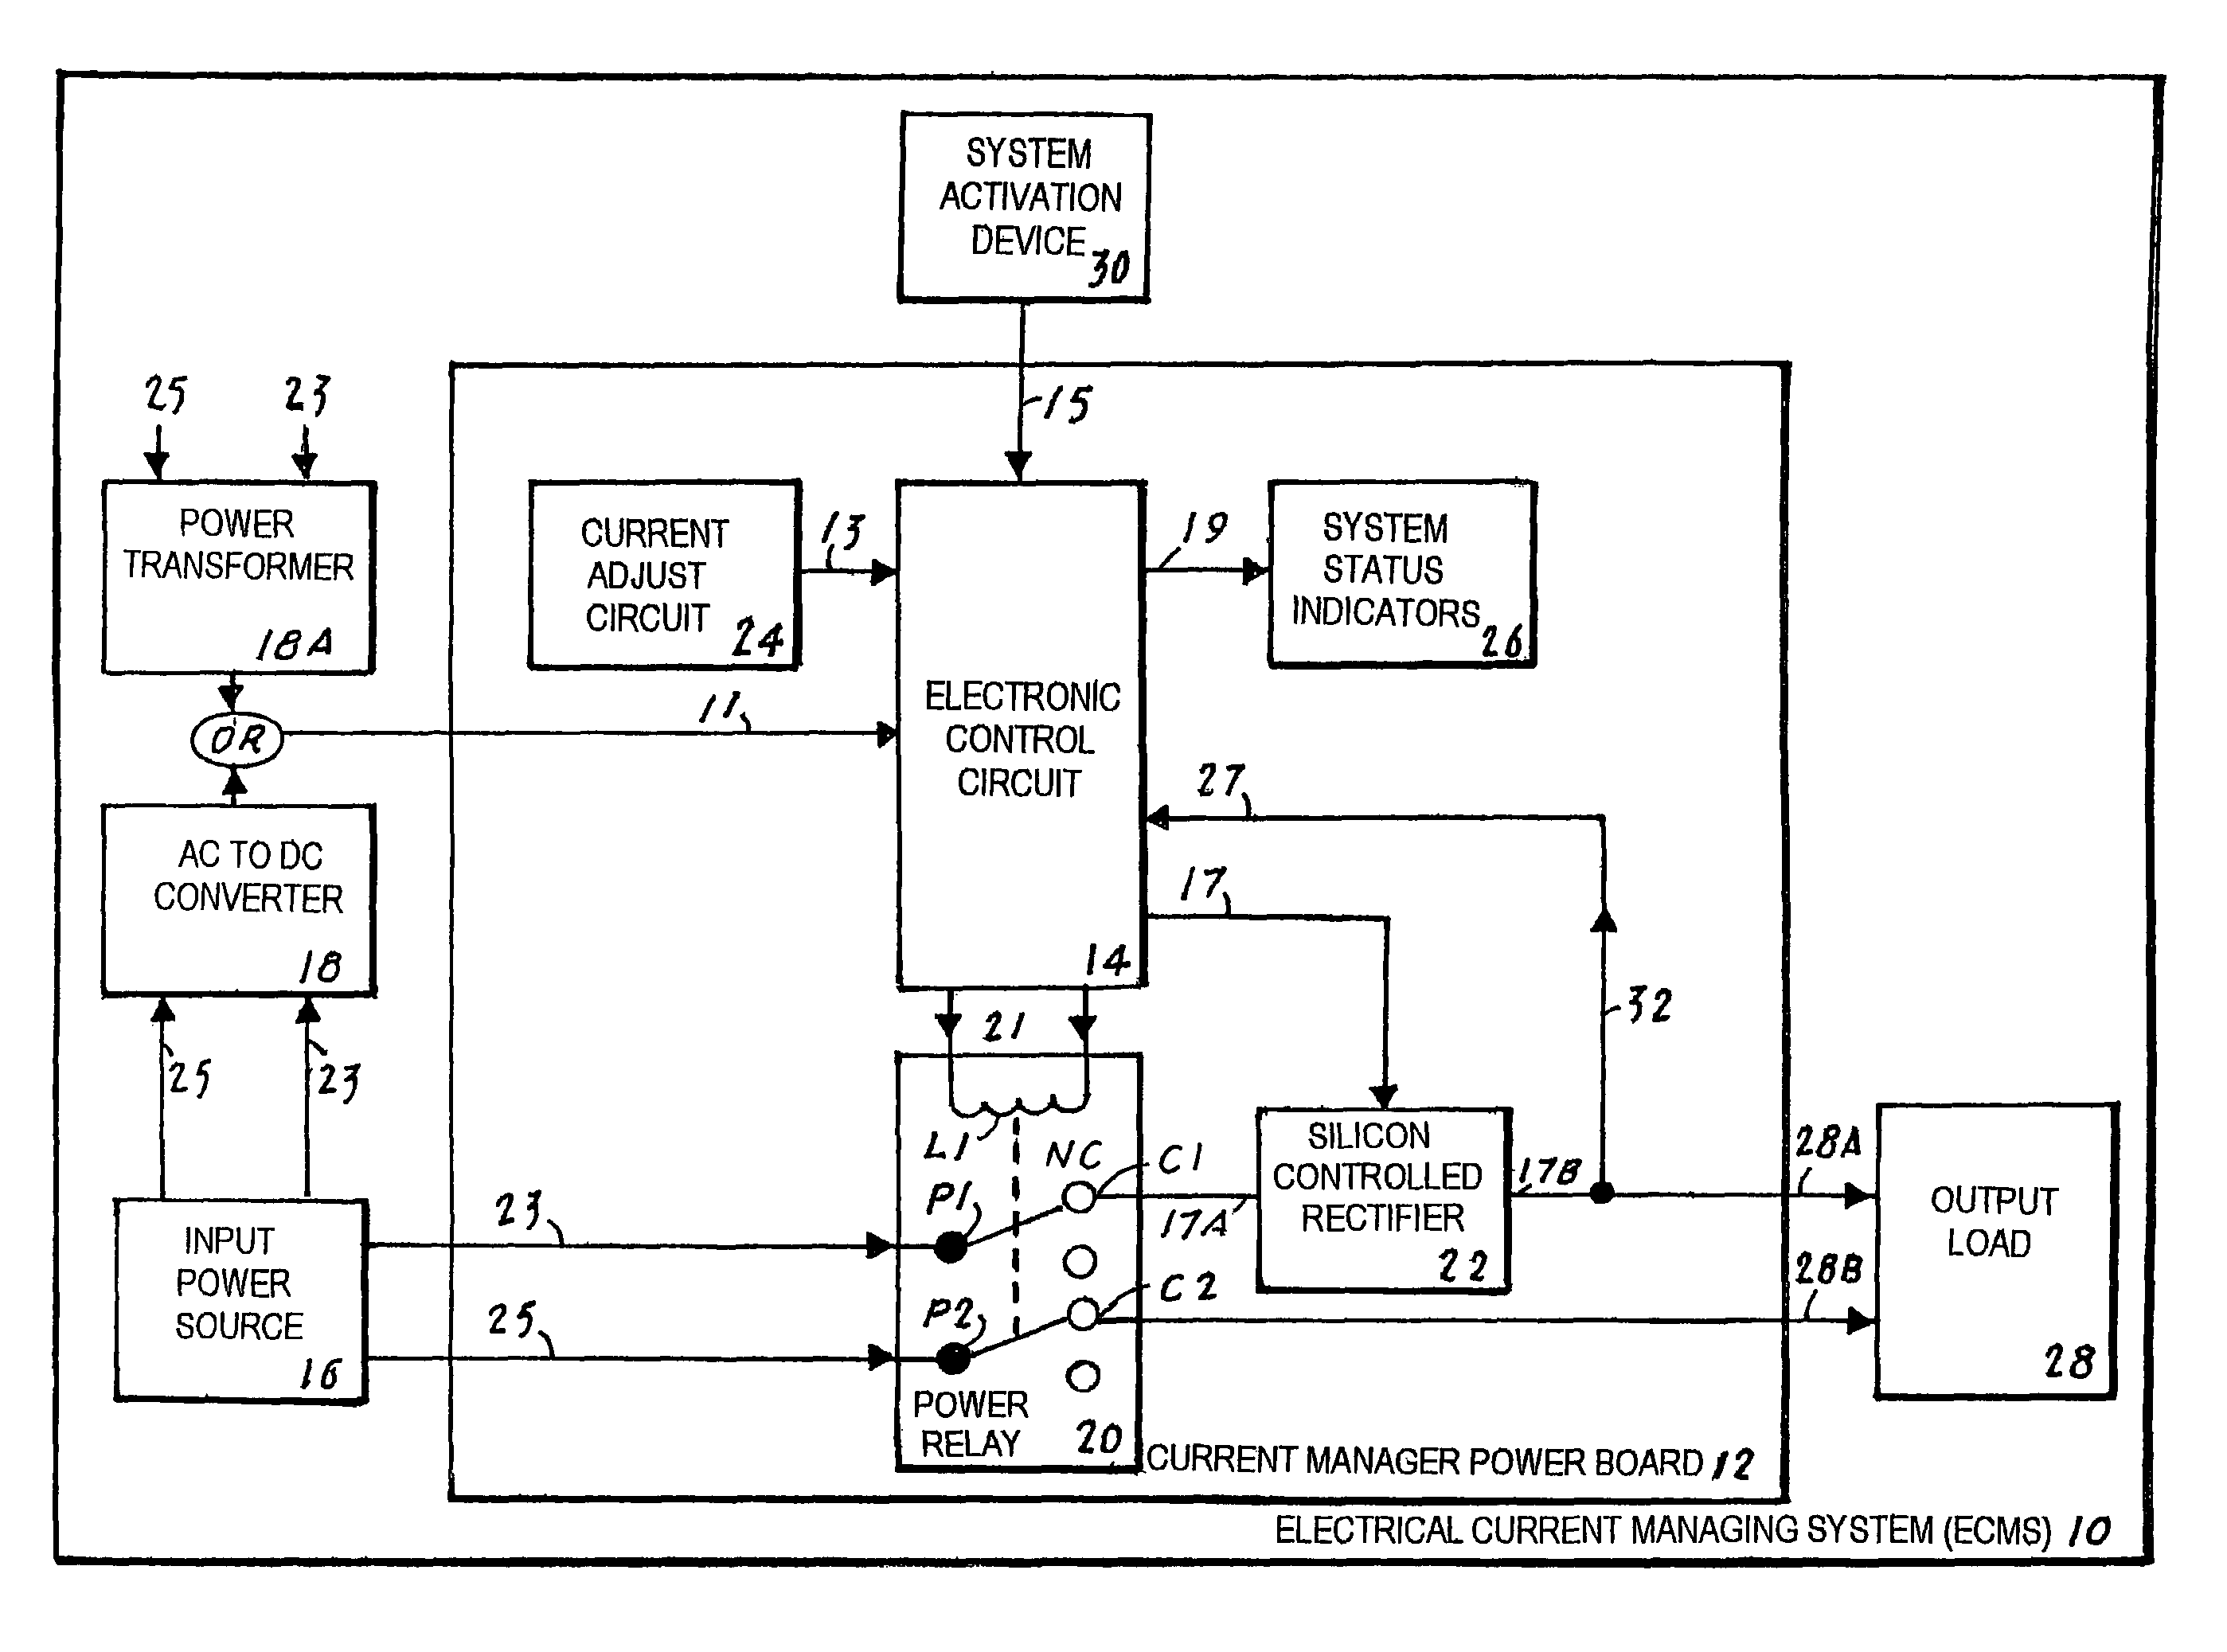 Electrical current managing system